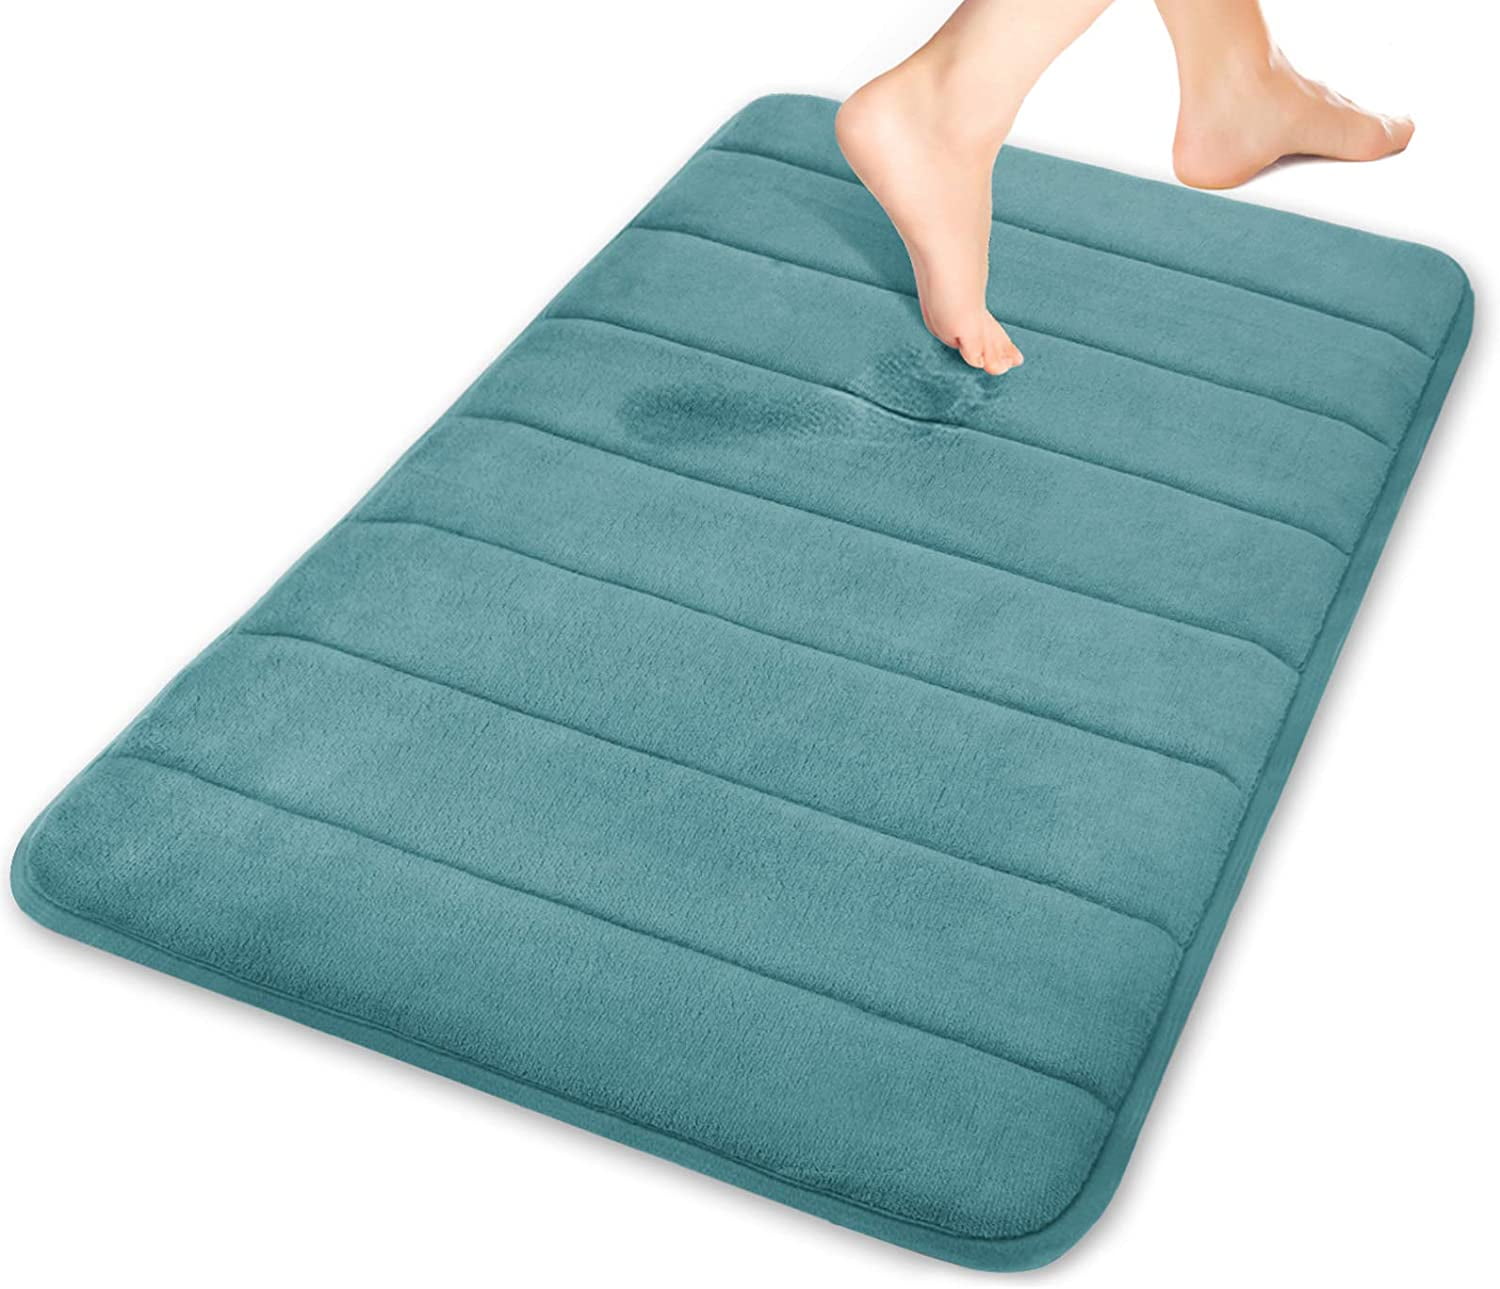 Yimobra Memory Foam Bath Mat Large Size,31.5 x 19.8 Inches, Soft and  Comfortable, Super Water Absorption, Non-Slip, Thick, Machine Wash, Easier  to Dry for Bathroom Floor Rug, Eggshell Blue 